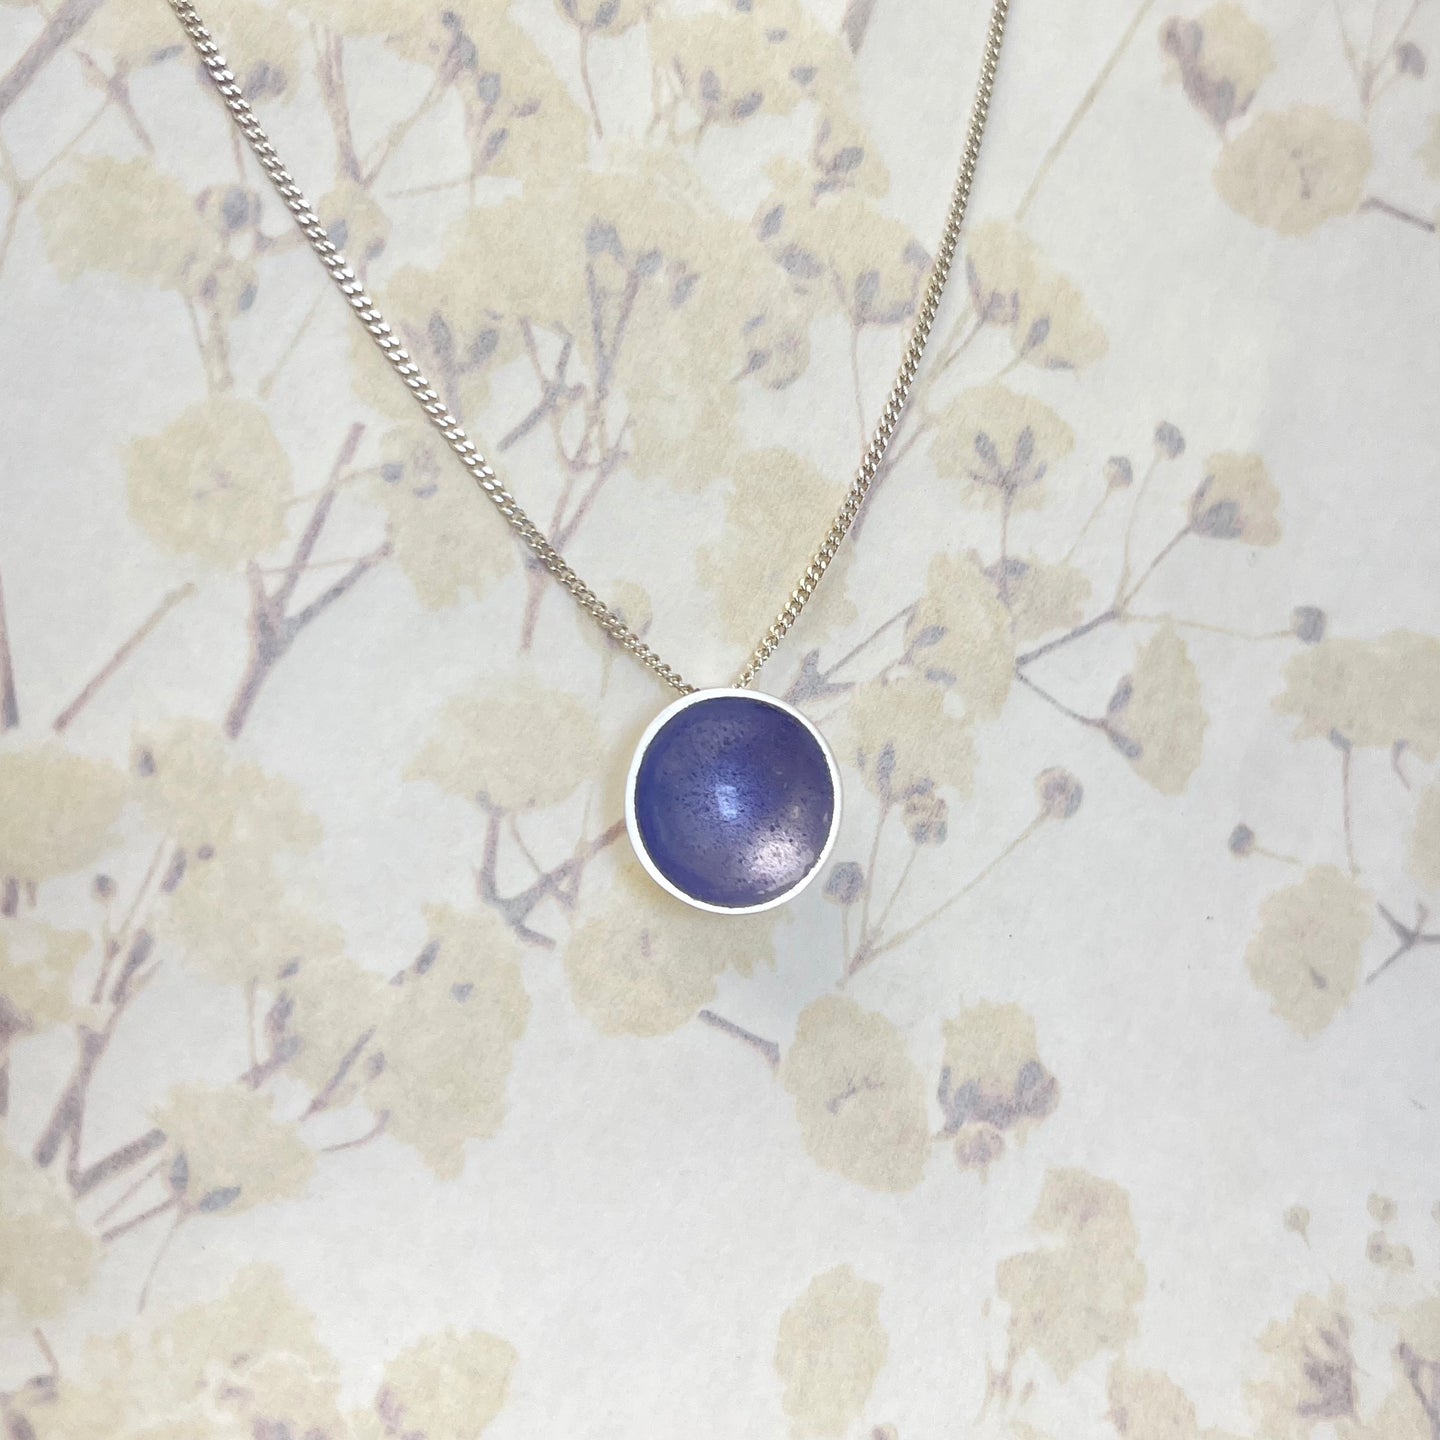 Silver and purple halo disc necklace